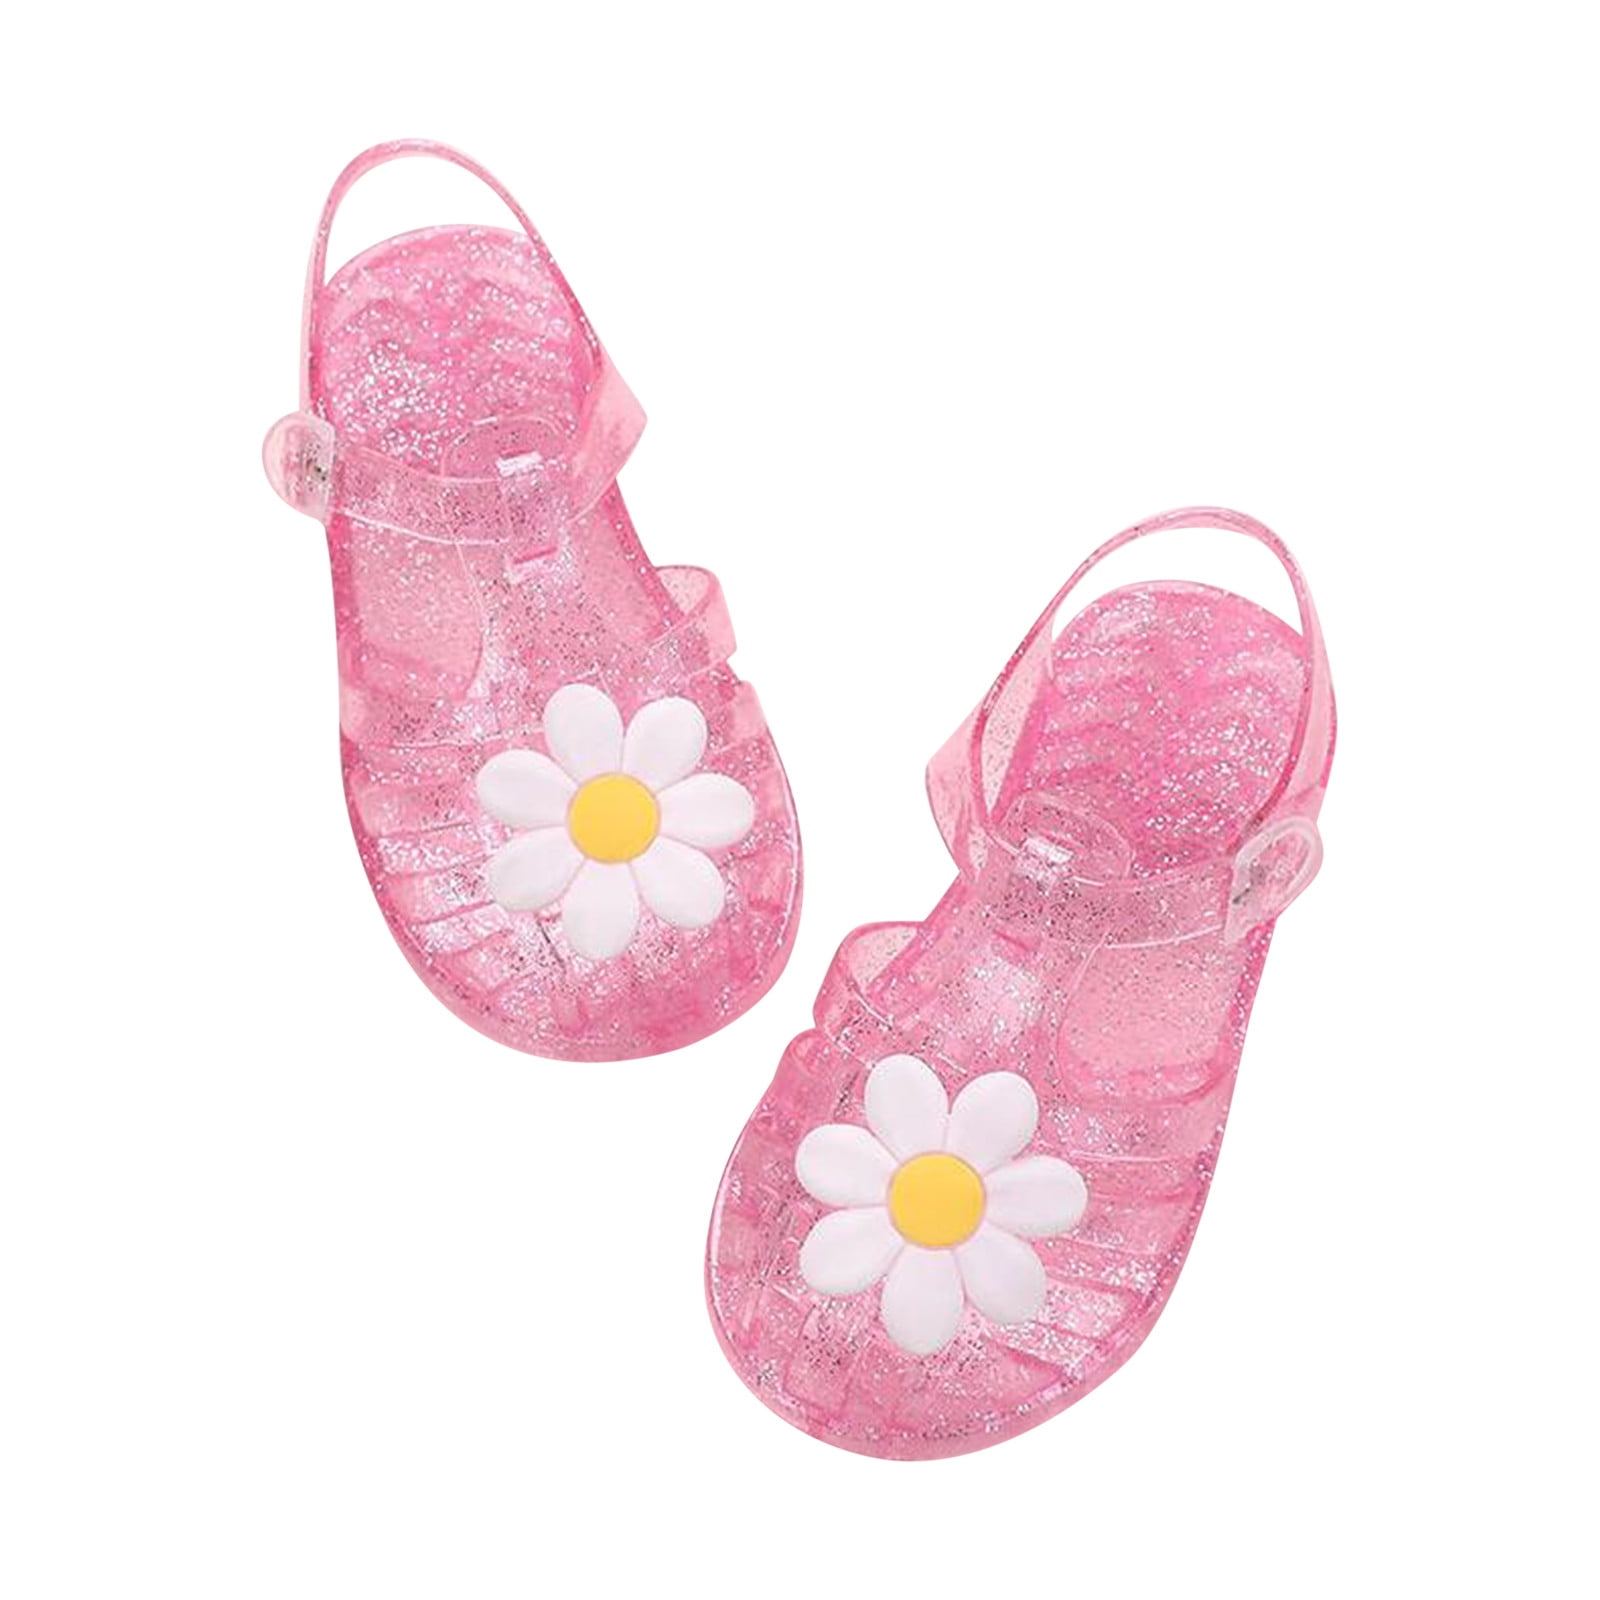 Fridja Toddler Sandles Girls Jelly Sandals Rubber Sole Closed Toe ...